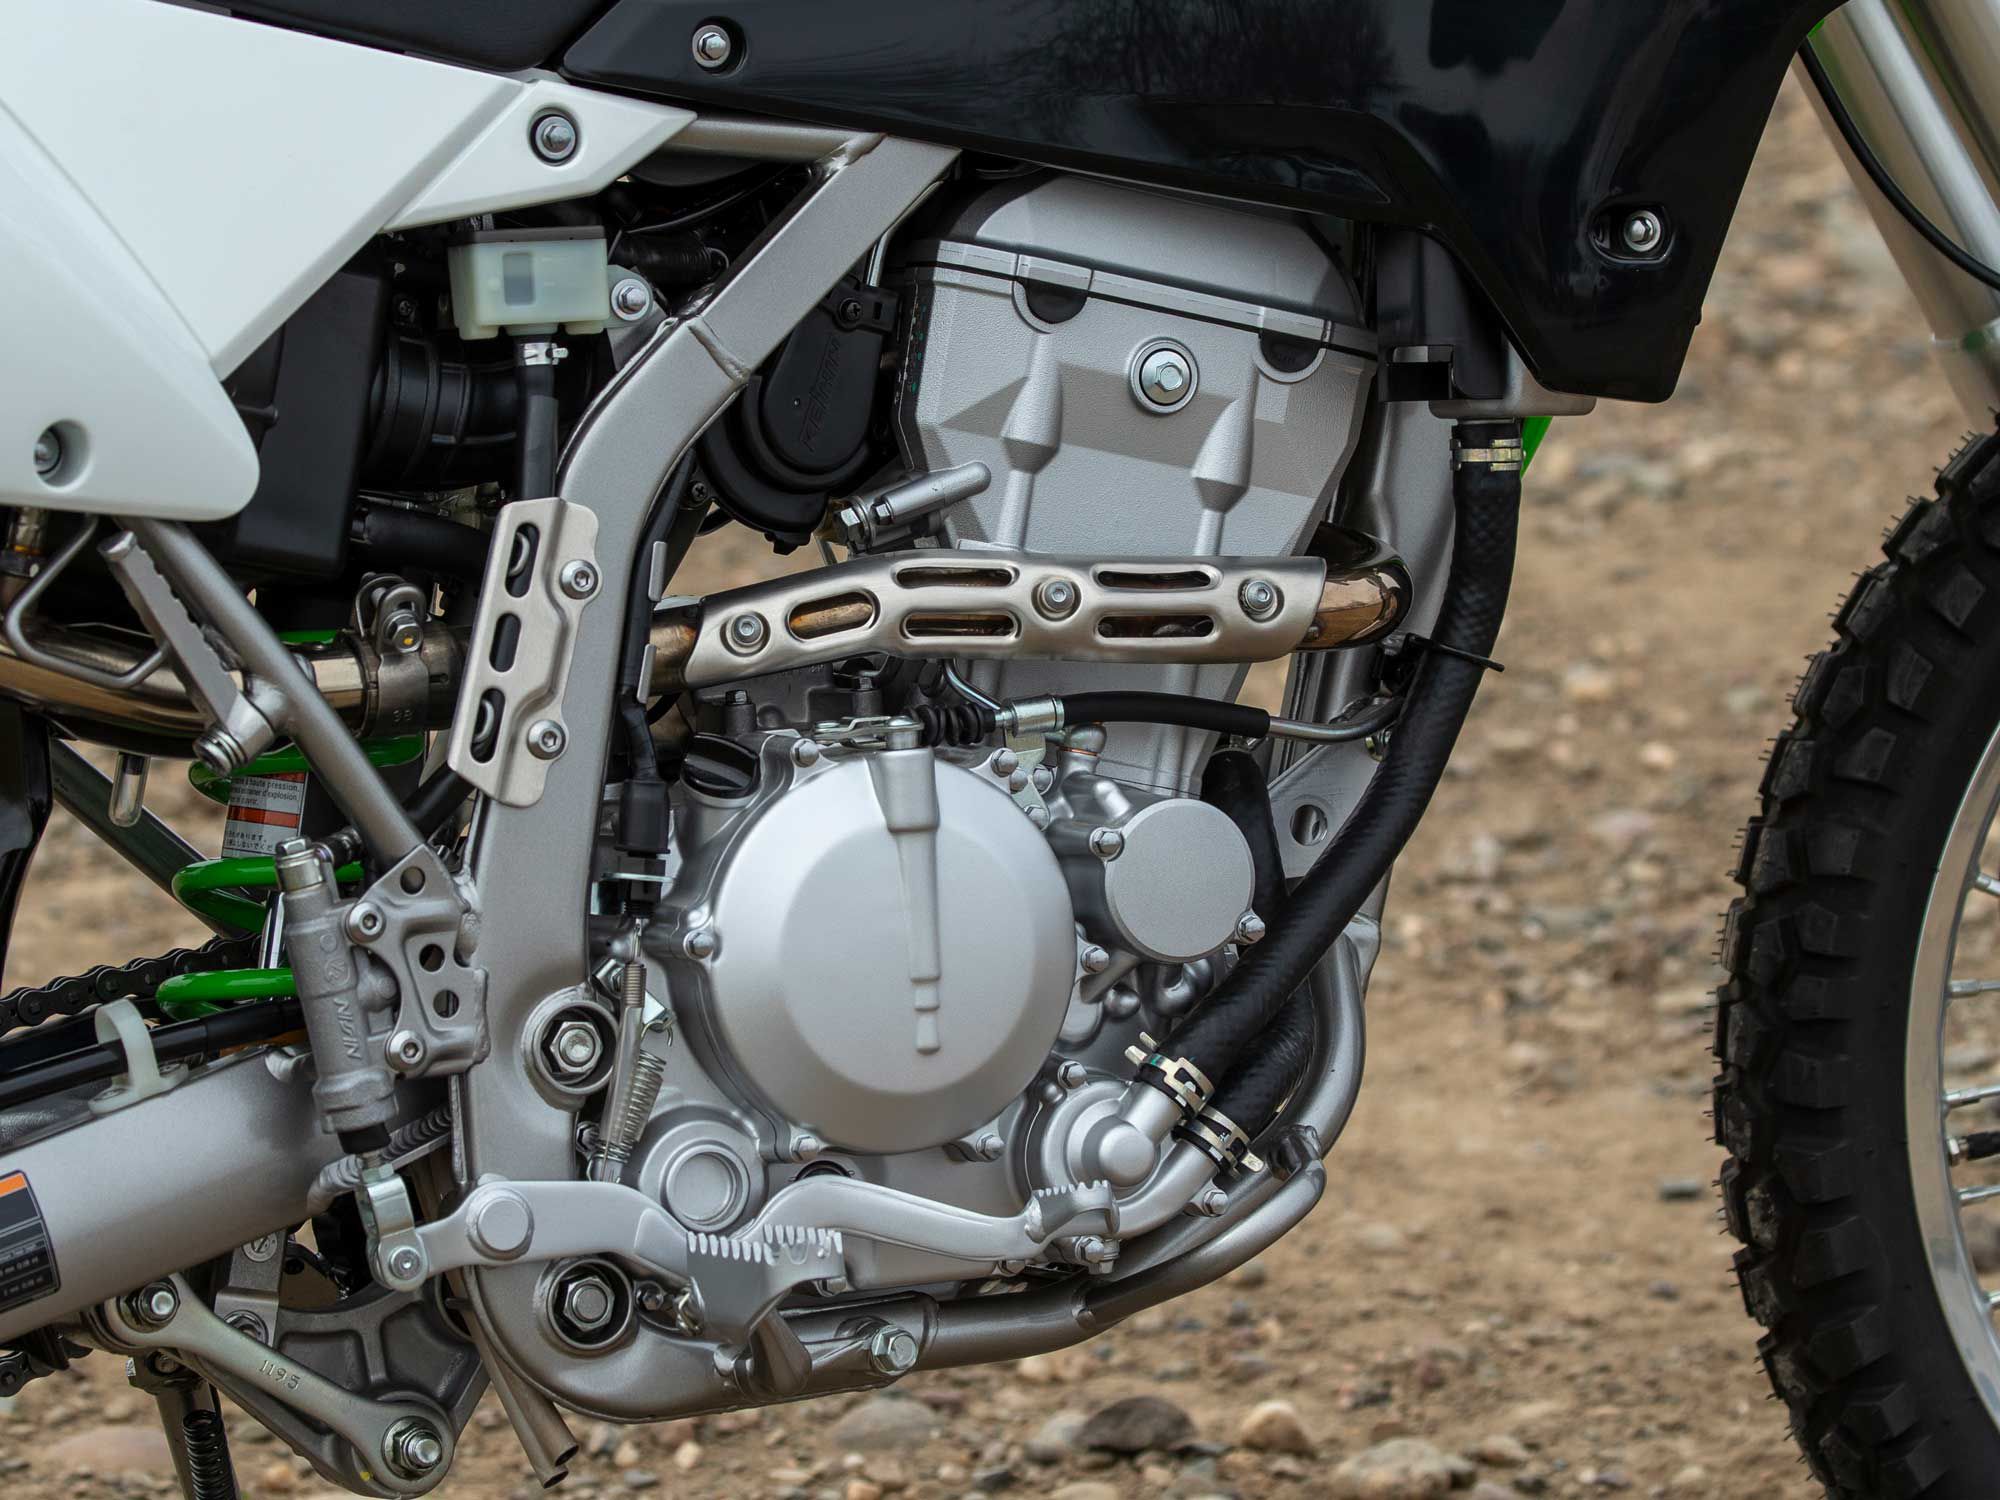 Equipped with EFI and convenient electric start, the KLX proved hassle-free to cold start, a momentary bump of the thumb button effortlessly prodding the motor into a smooth idle.